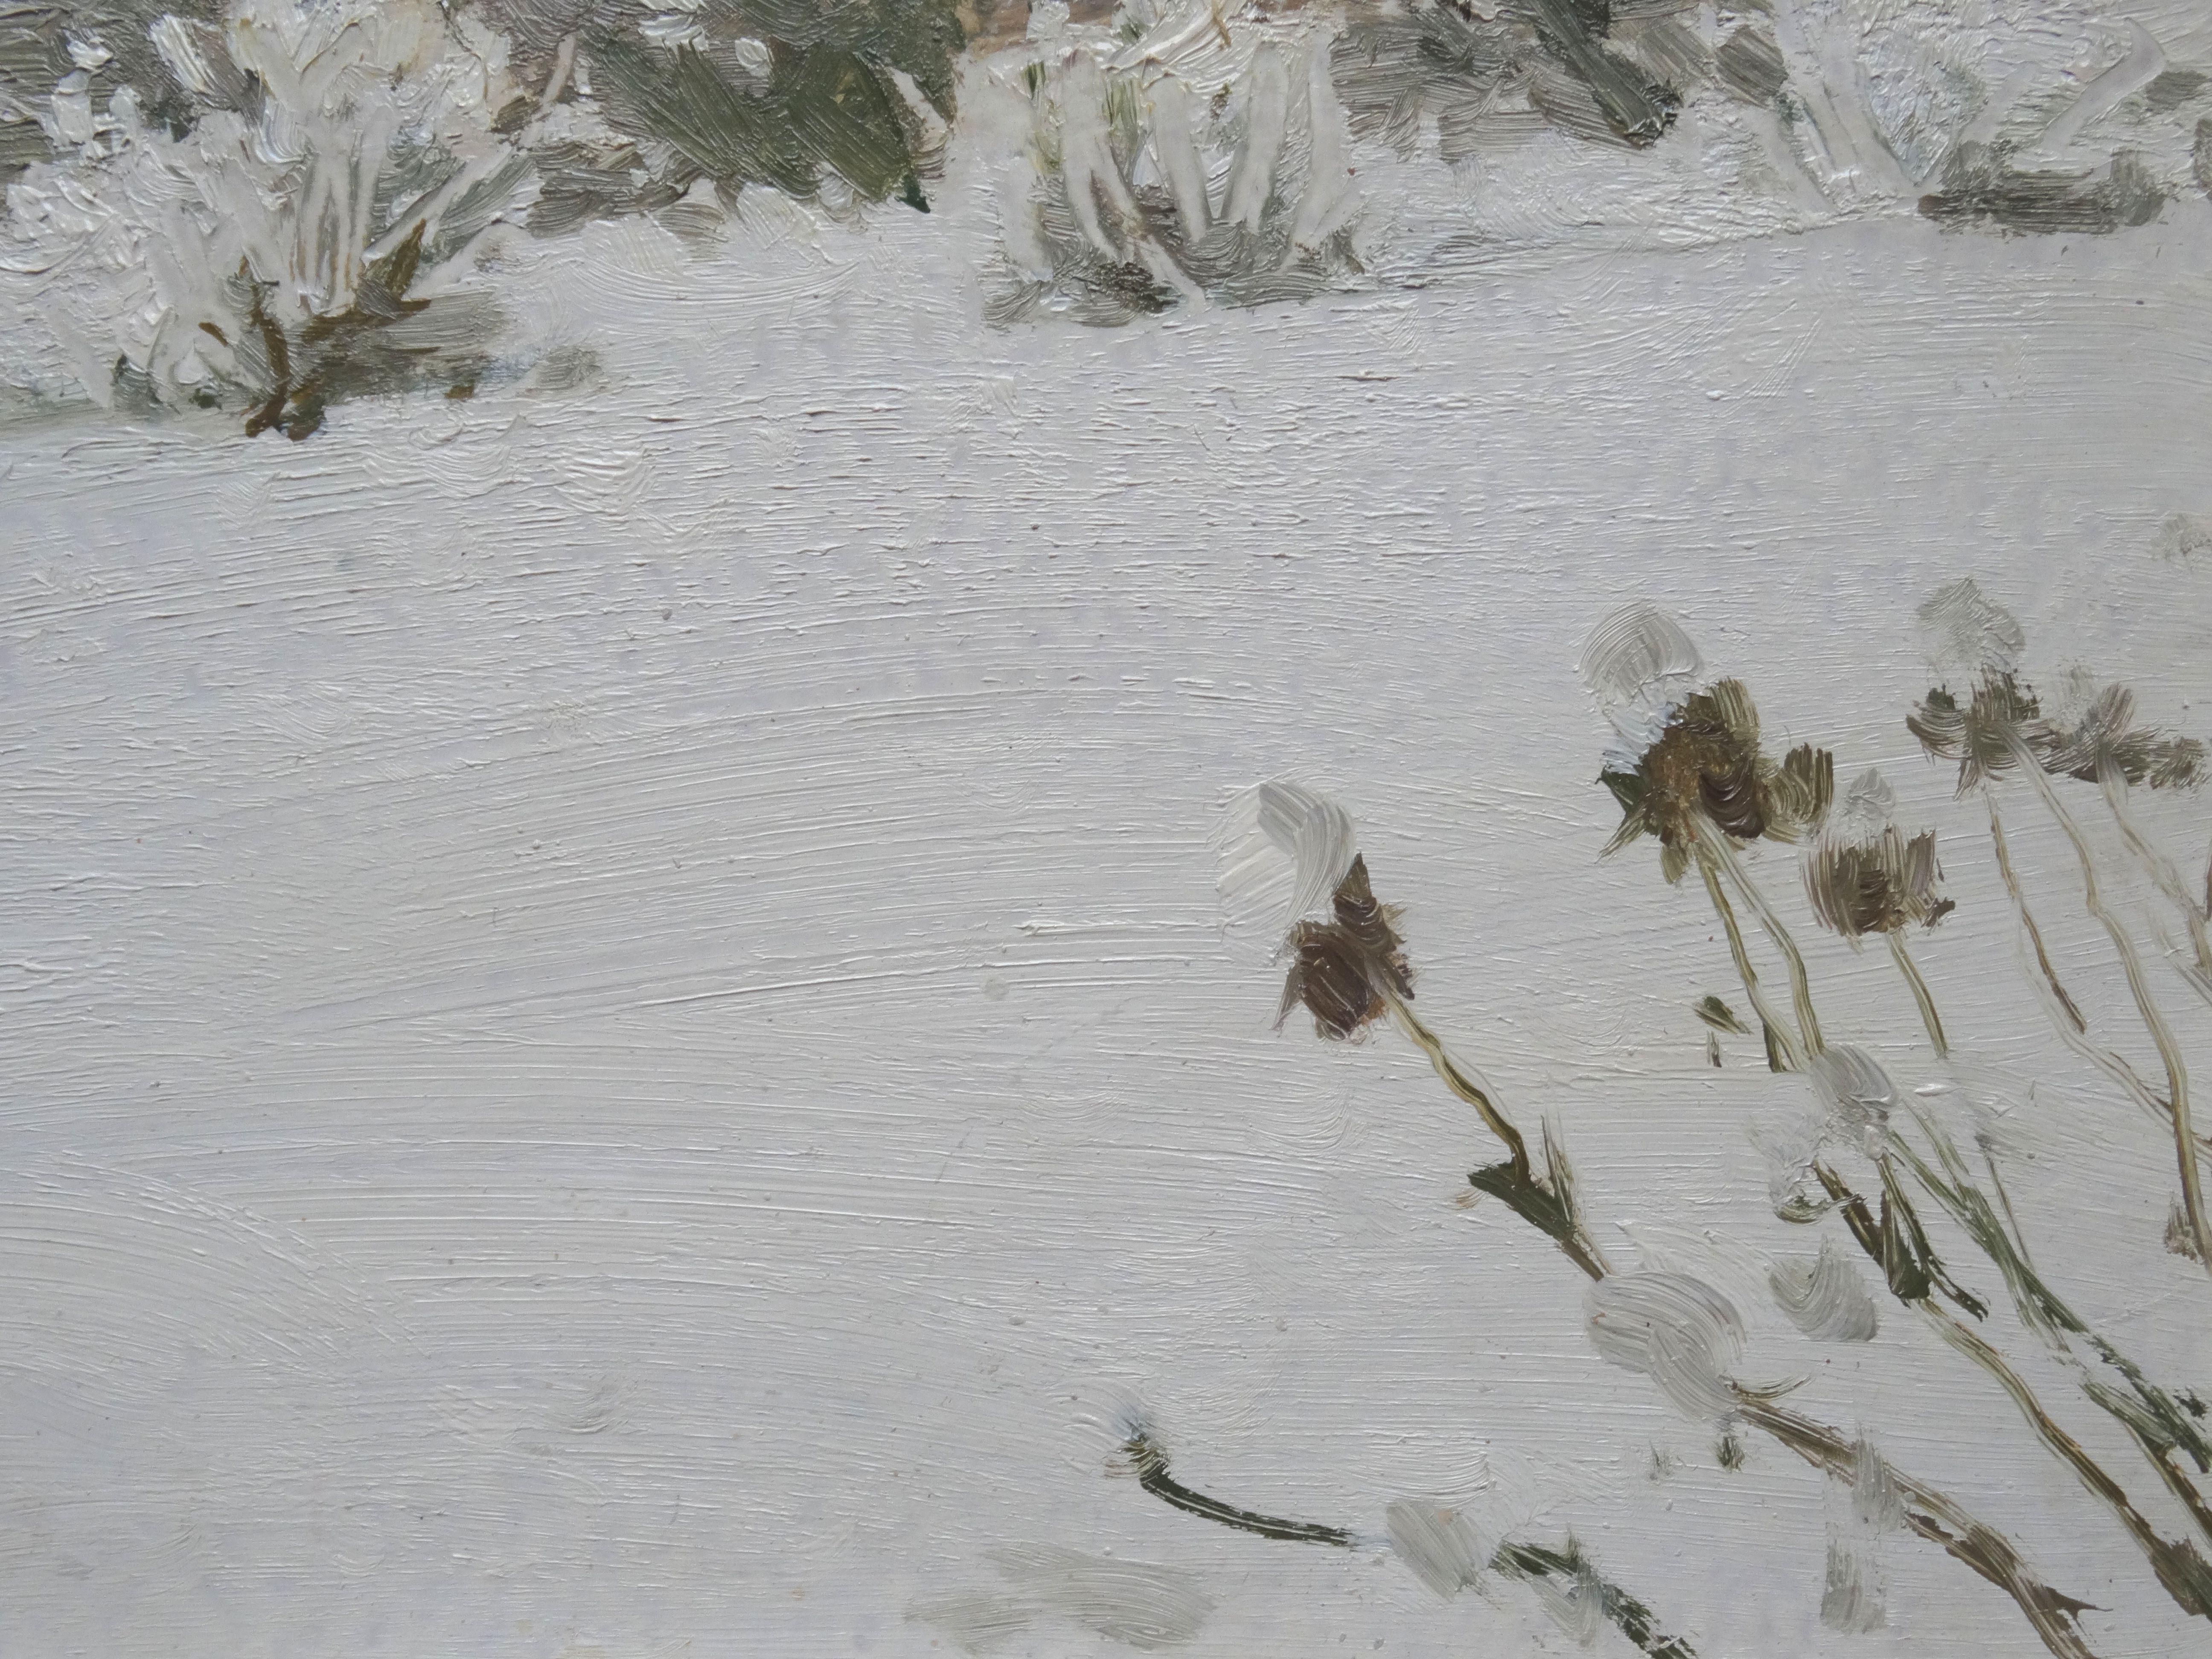 Frost. 1985, oil on cardboard, 40x50 cm
Light winter landscape

Alfejs Bromults (1913.3.IV - 1991.11.I)

His first professional education was at National University at studies to R.Suta, J. Bine and G. Skilters. Still 1938 he learned at academy of